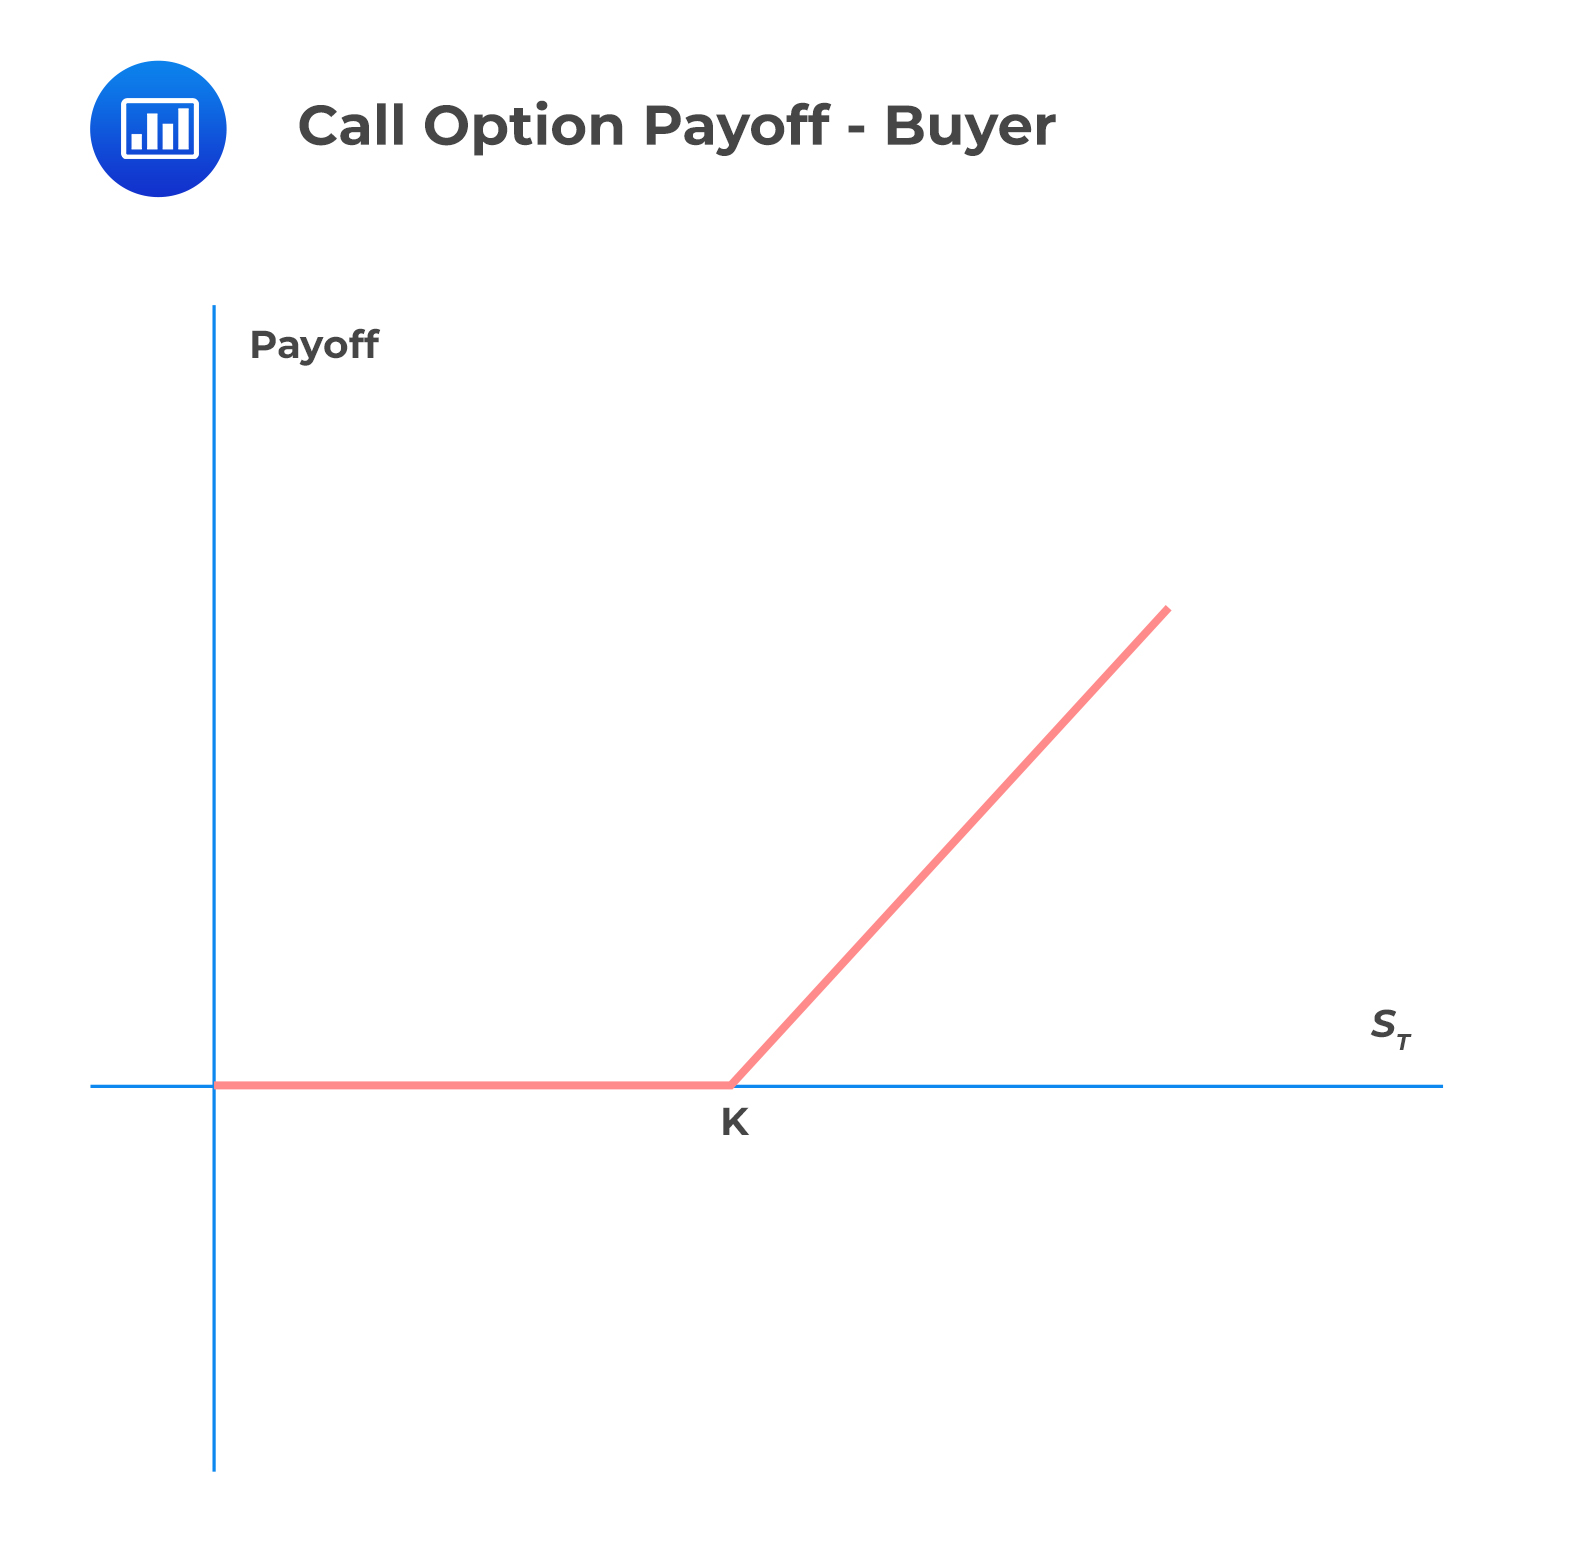 Call Option Payoff - Buyer